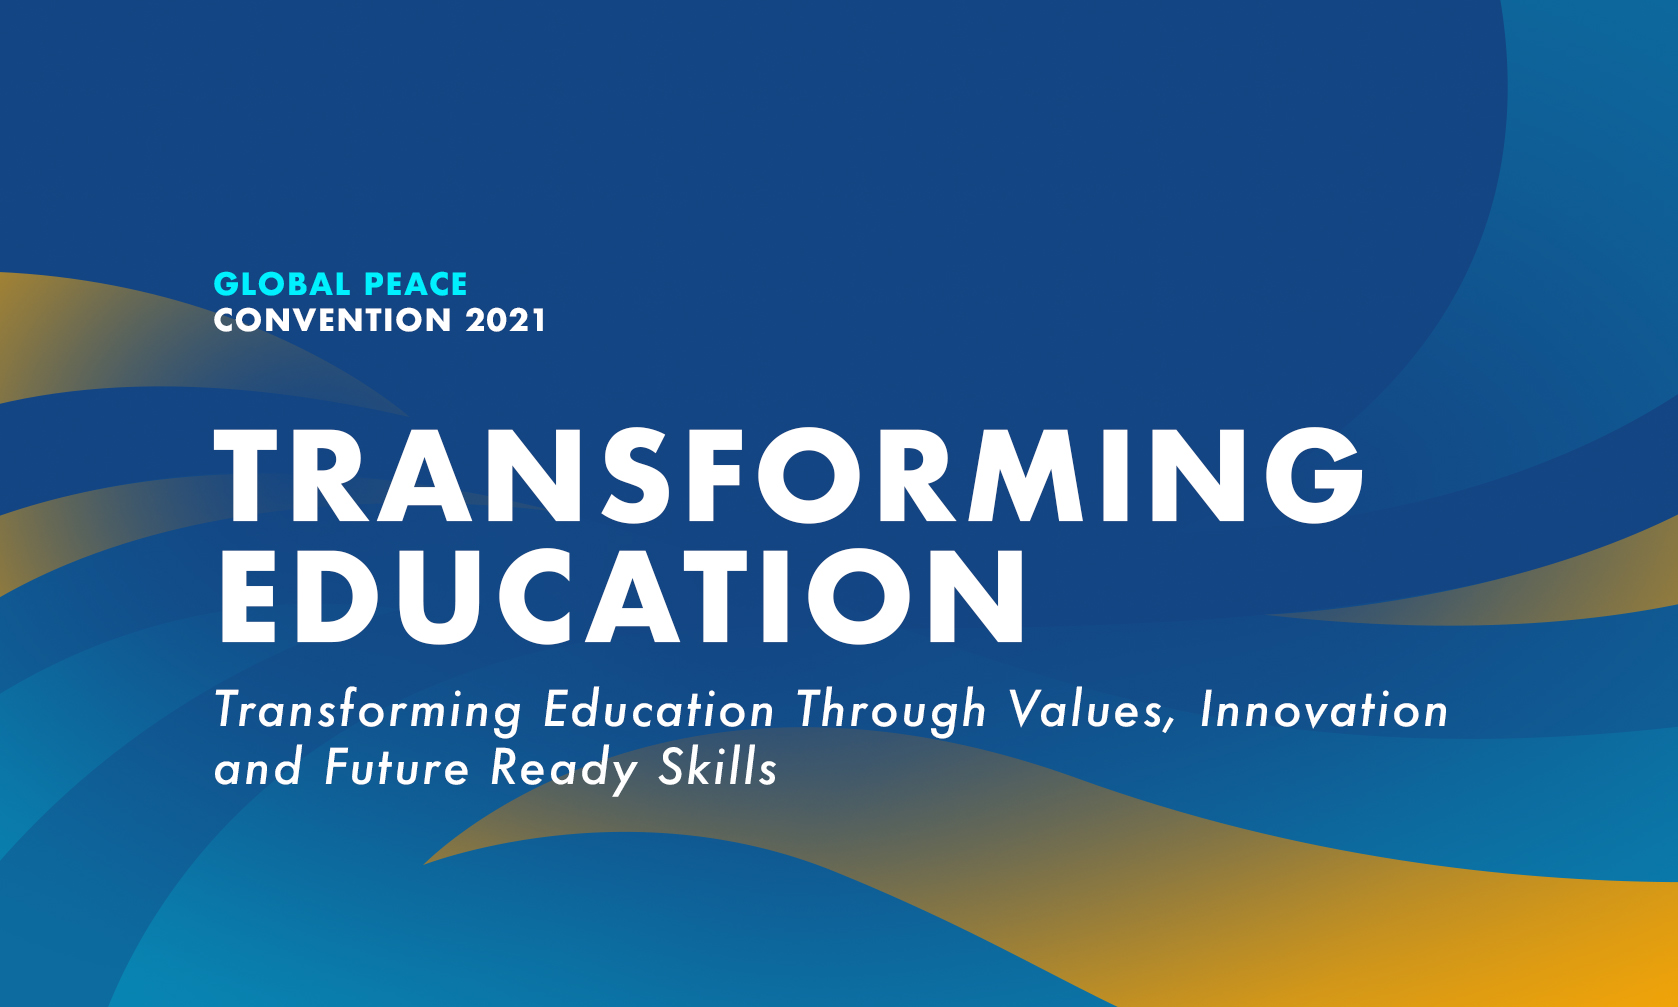 Global Peace Foundation | Global Peace Convention 2021 - Education Track